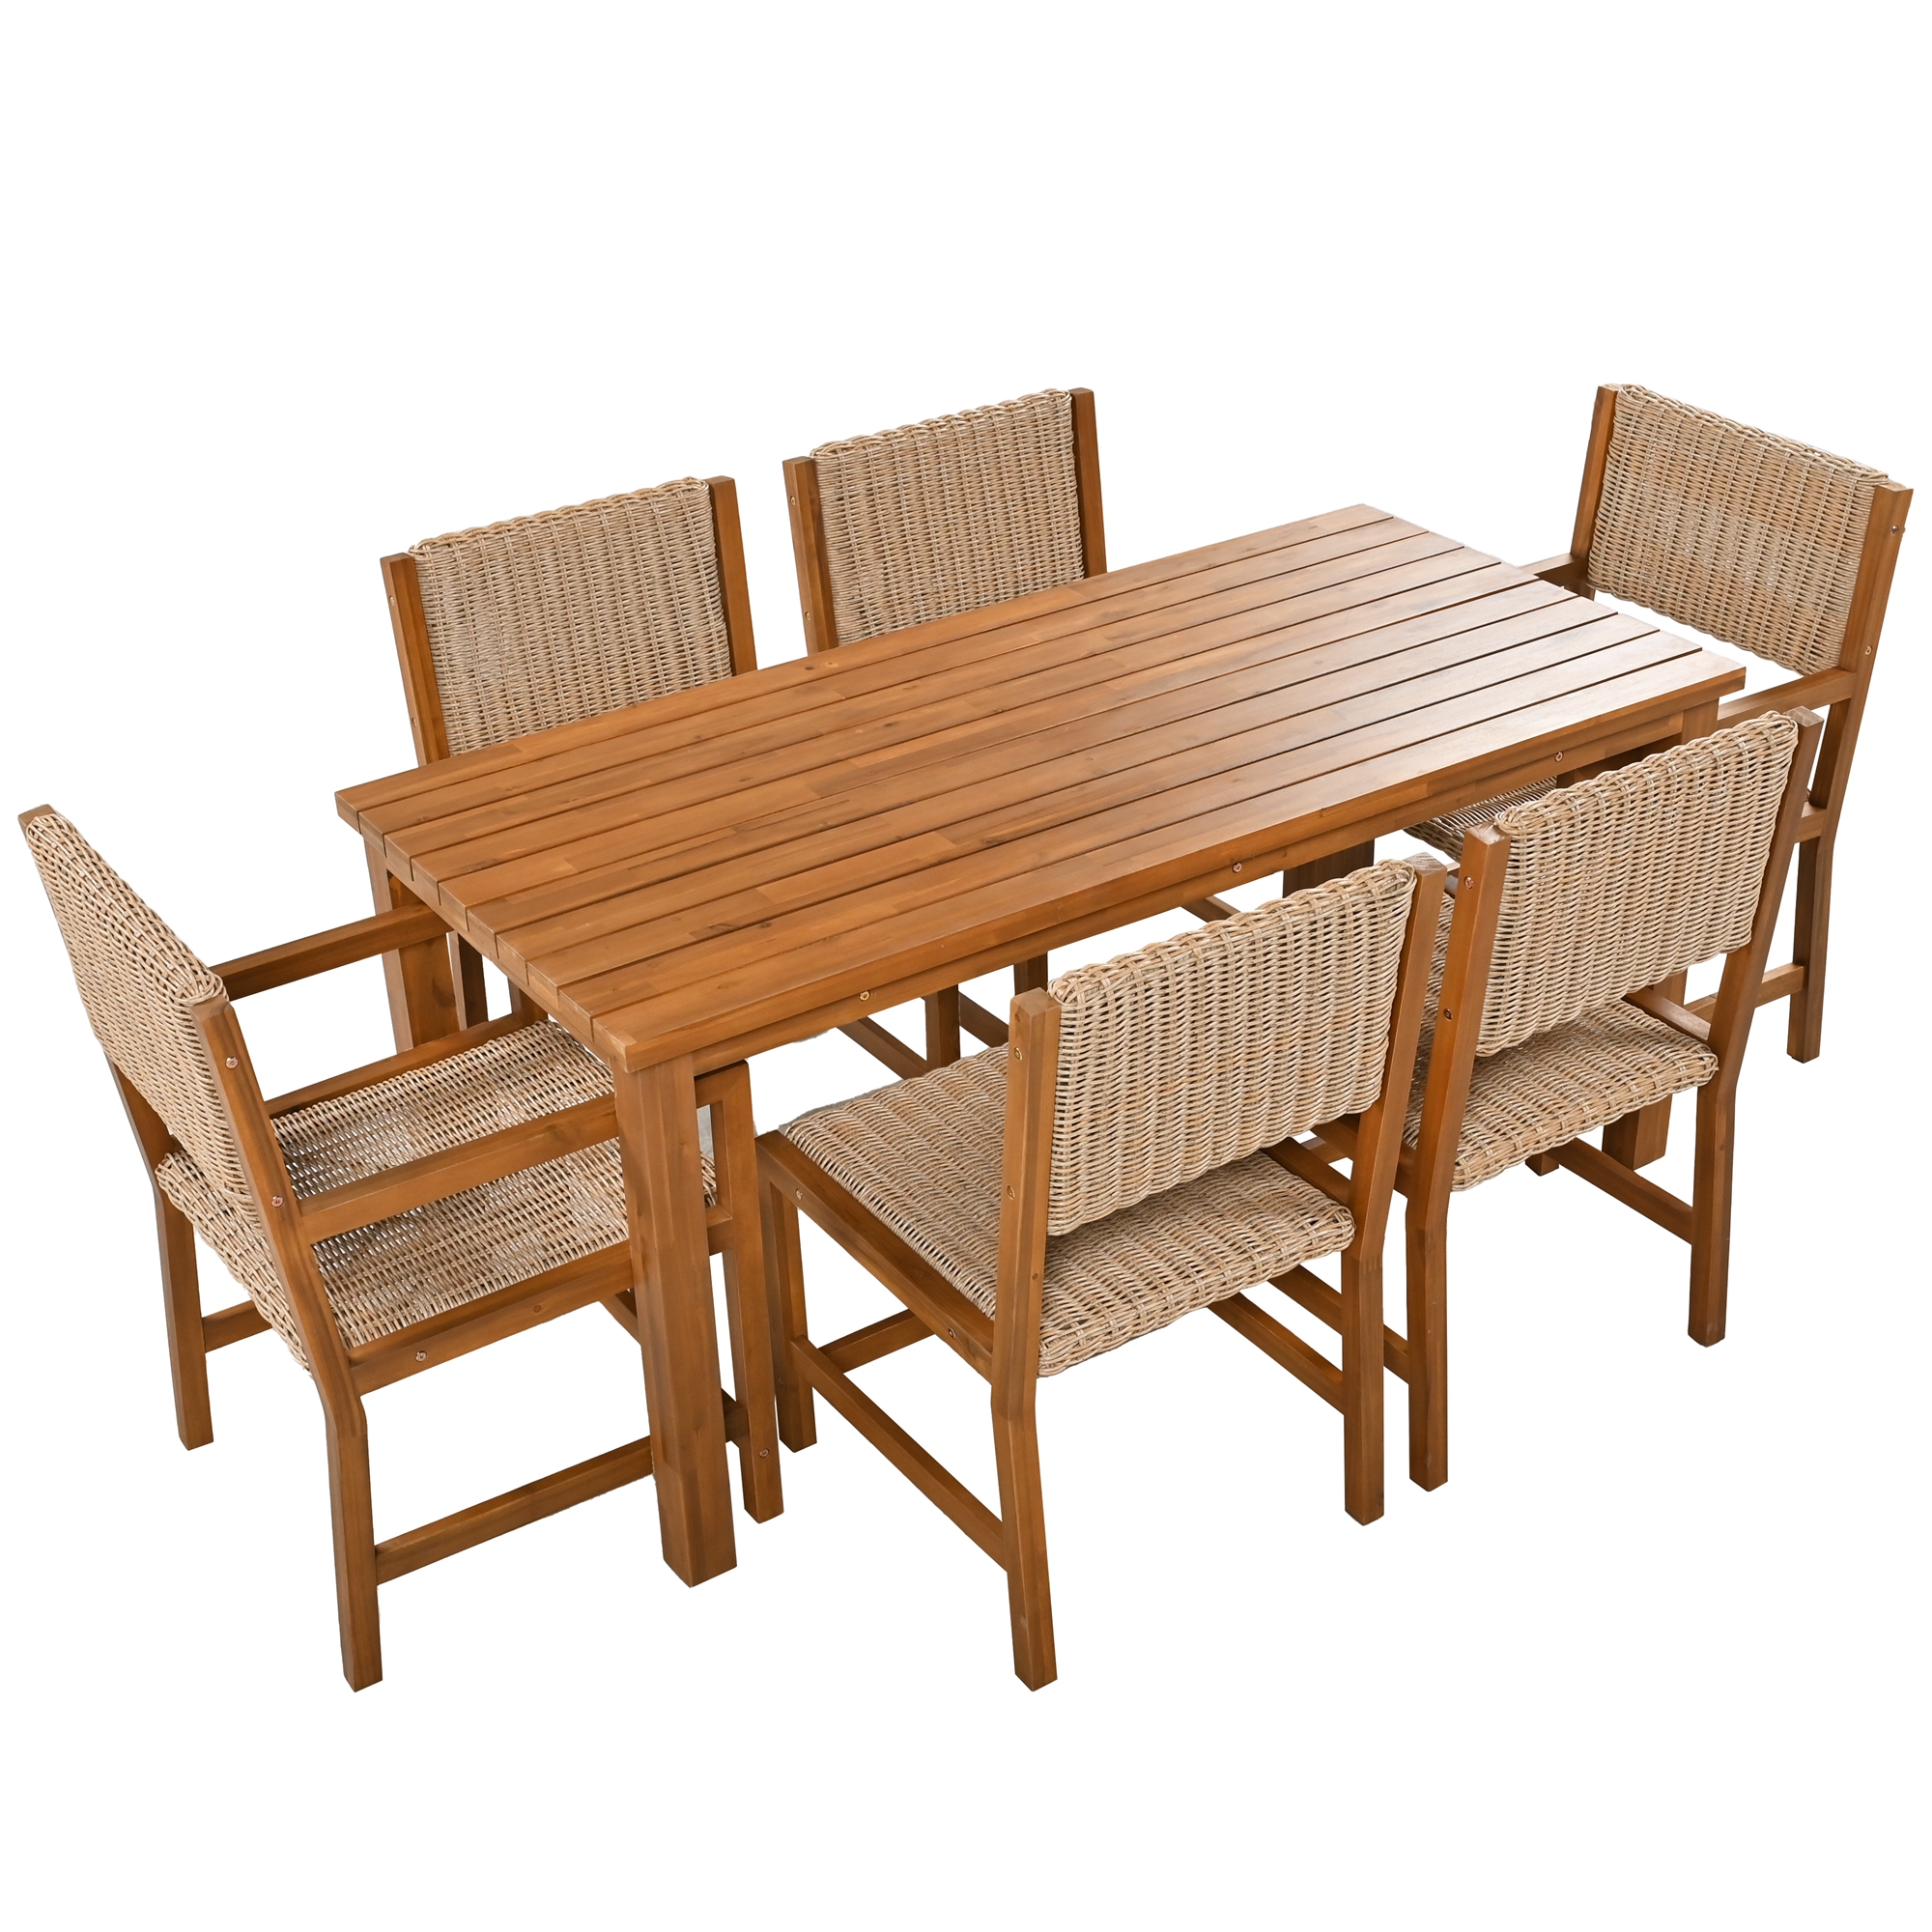 7 Piece Patio Rattan Dining Set, Outdoor Space Saving Rattan Chairs with Acacia Wood Table, All-Weather Dining Table and Chairs Set, HDPE Rattan Dining Chairs Set for Balcony Patio Garden Poolside - image 3 of 8